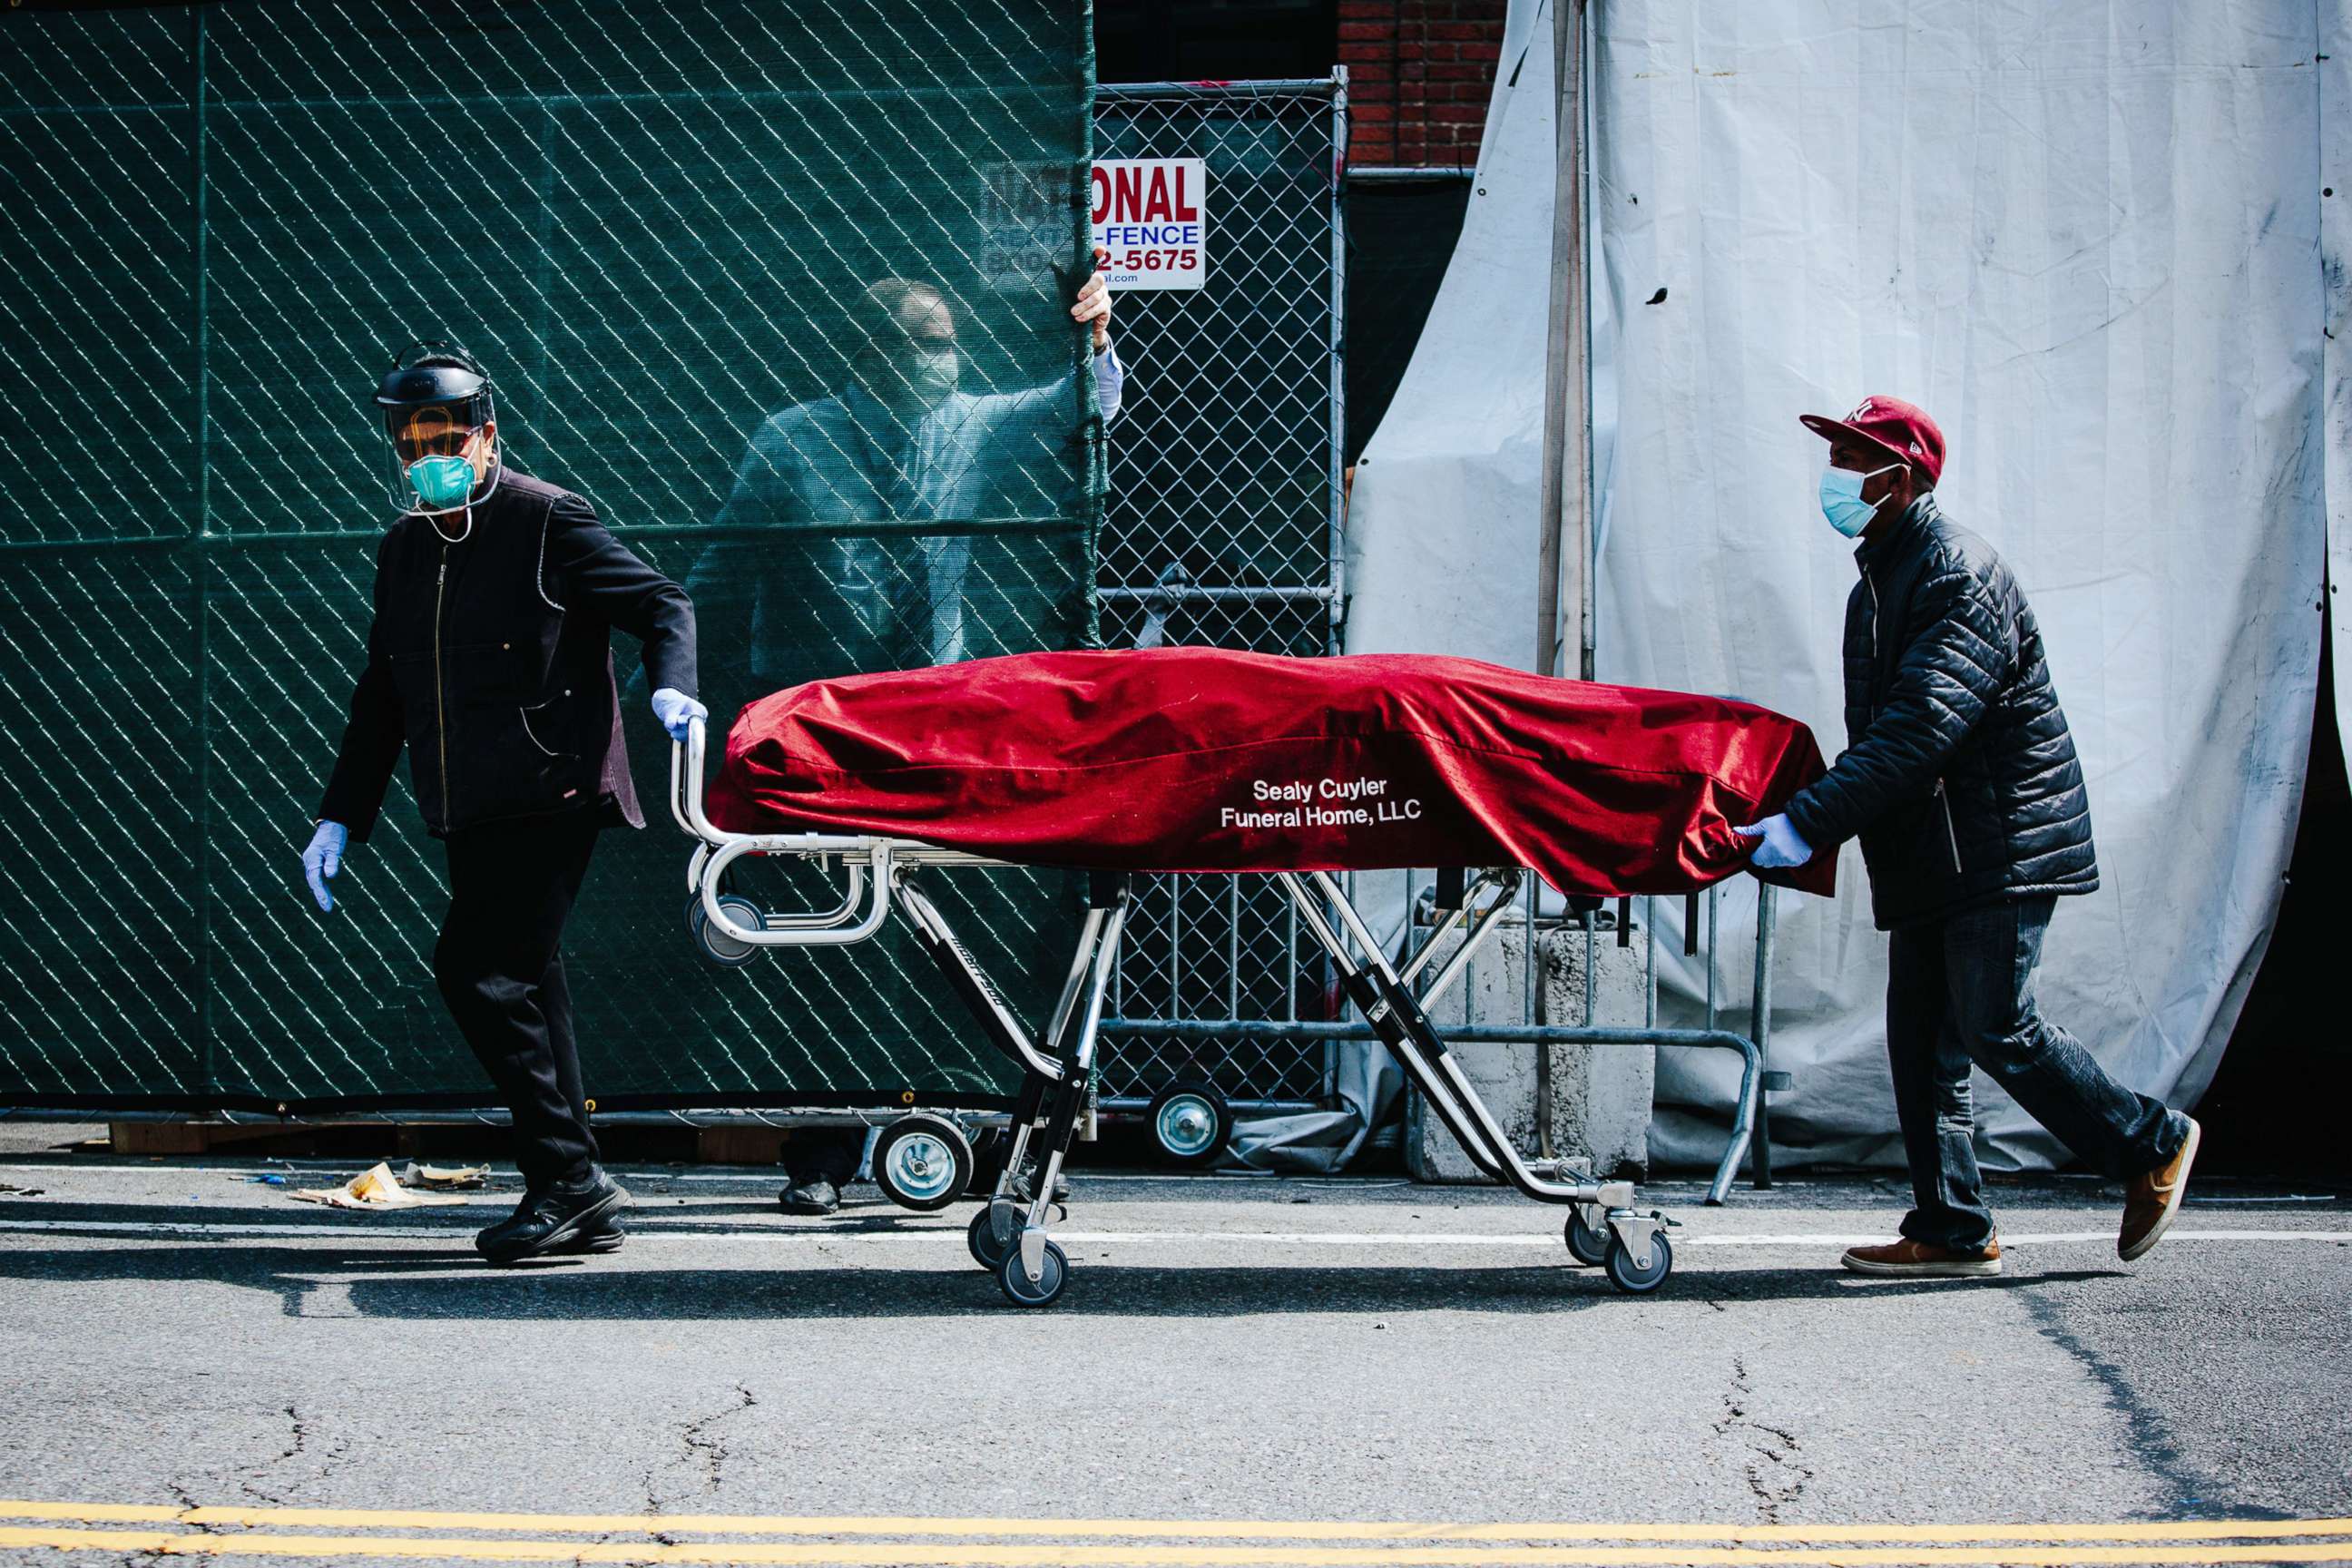 PHOTO: Hospital employees and funeral service employees transfer a body from a temporary mobile morgue into a funeral home vehicle outside of the Brooklyn Hospital Center, in Brooklyn, New York, April 8, 2020.